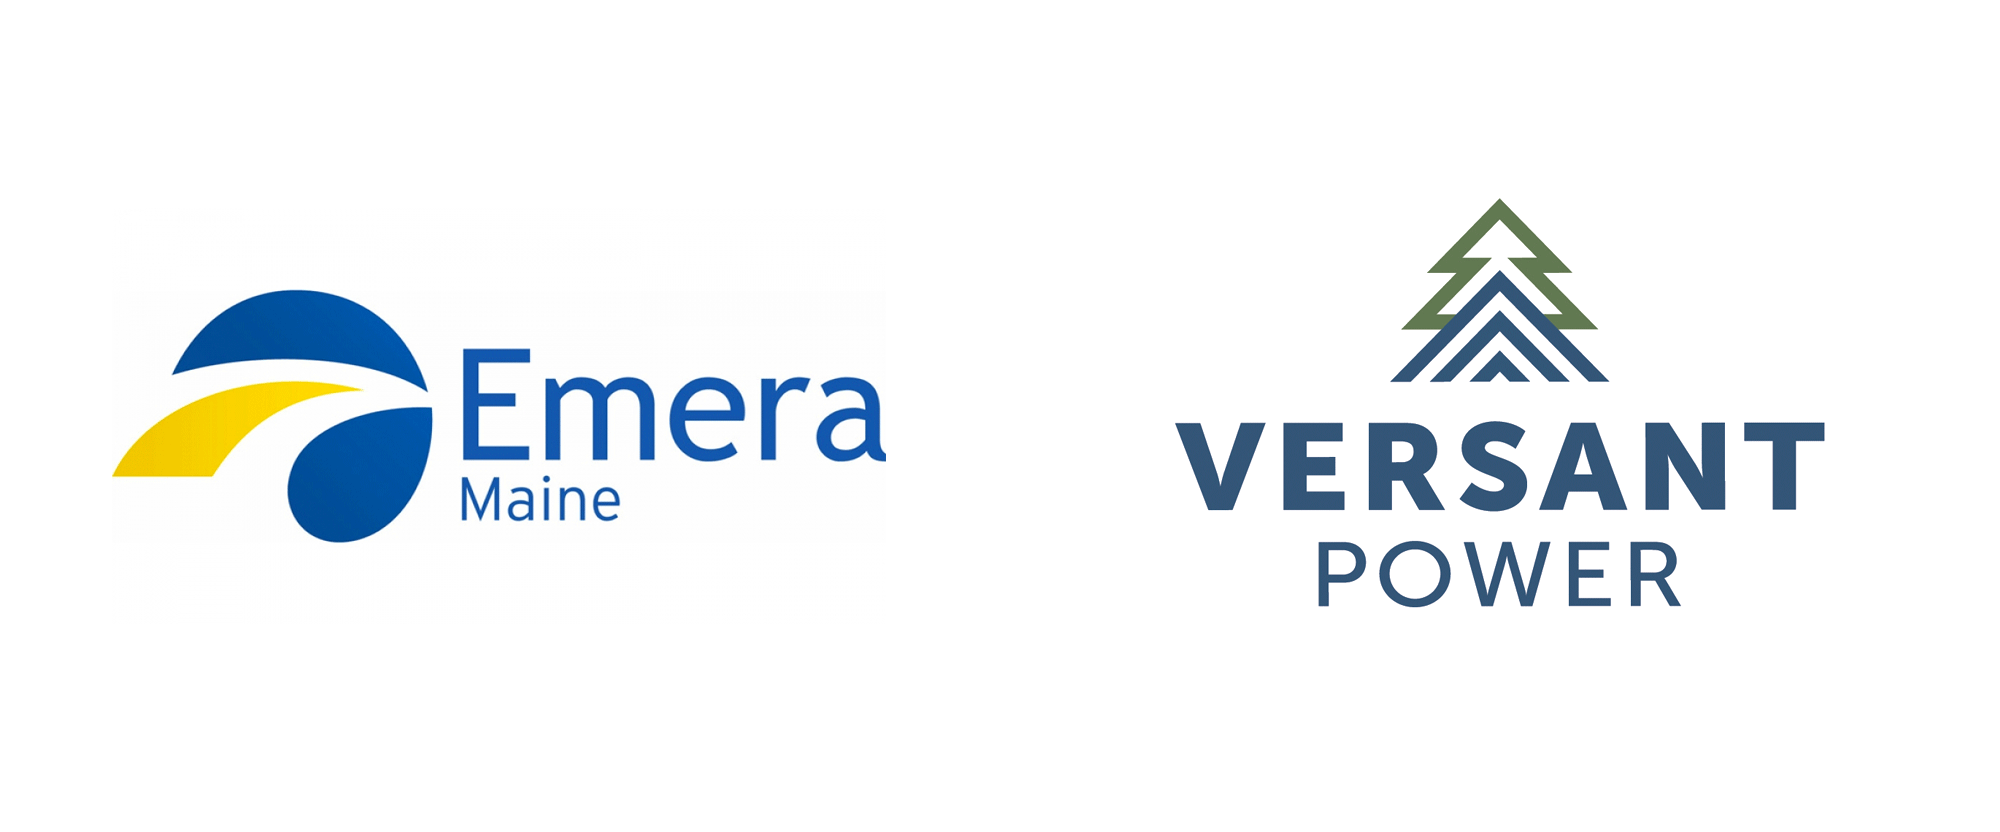 New Name and Logo for Versant Power